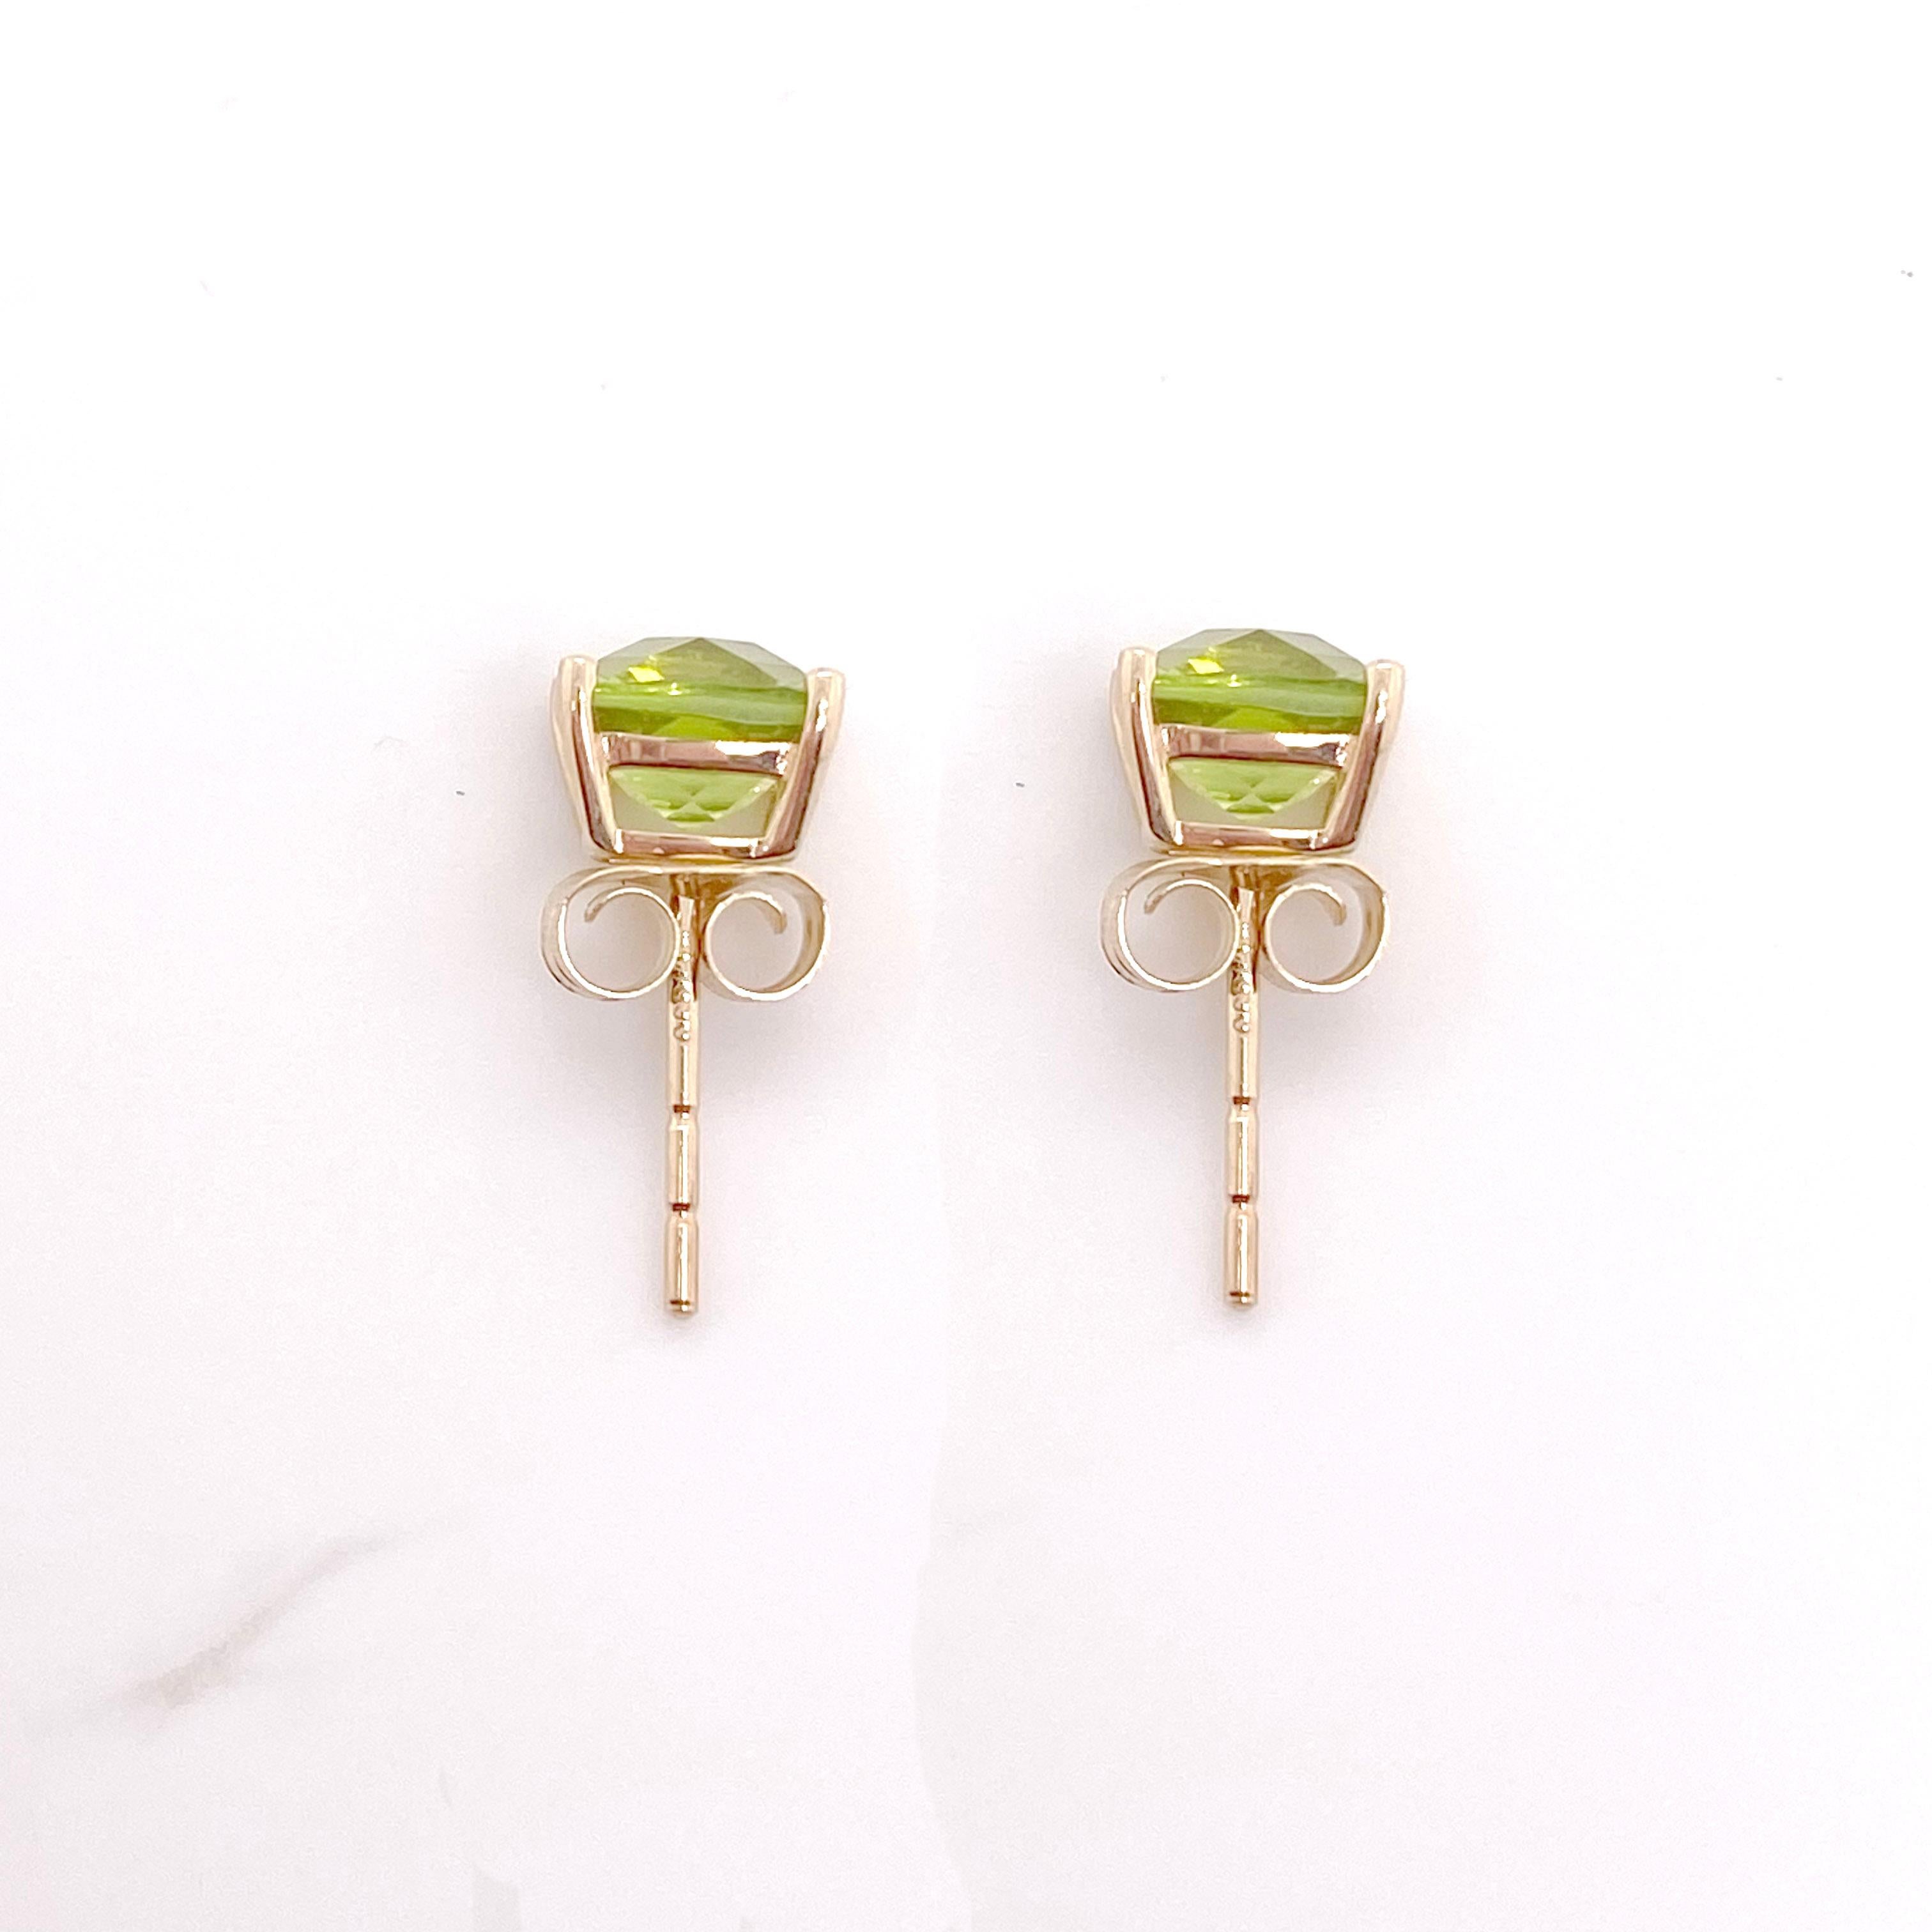 The details for these gorgeous earrings are listed below:
1 Set of 1 Earrings
Metal Quality: 14K Yellow Gold
Post Type: Push Back
Gemstone: Peridot
Gemstone Color: Bright Green
Gemstone Shape: Round 
Peridot Measurements: 7mm
Total Carat Weight: